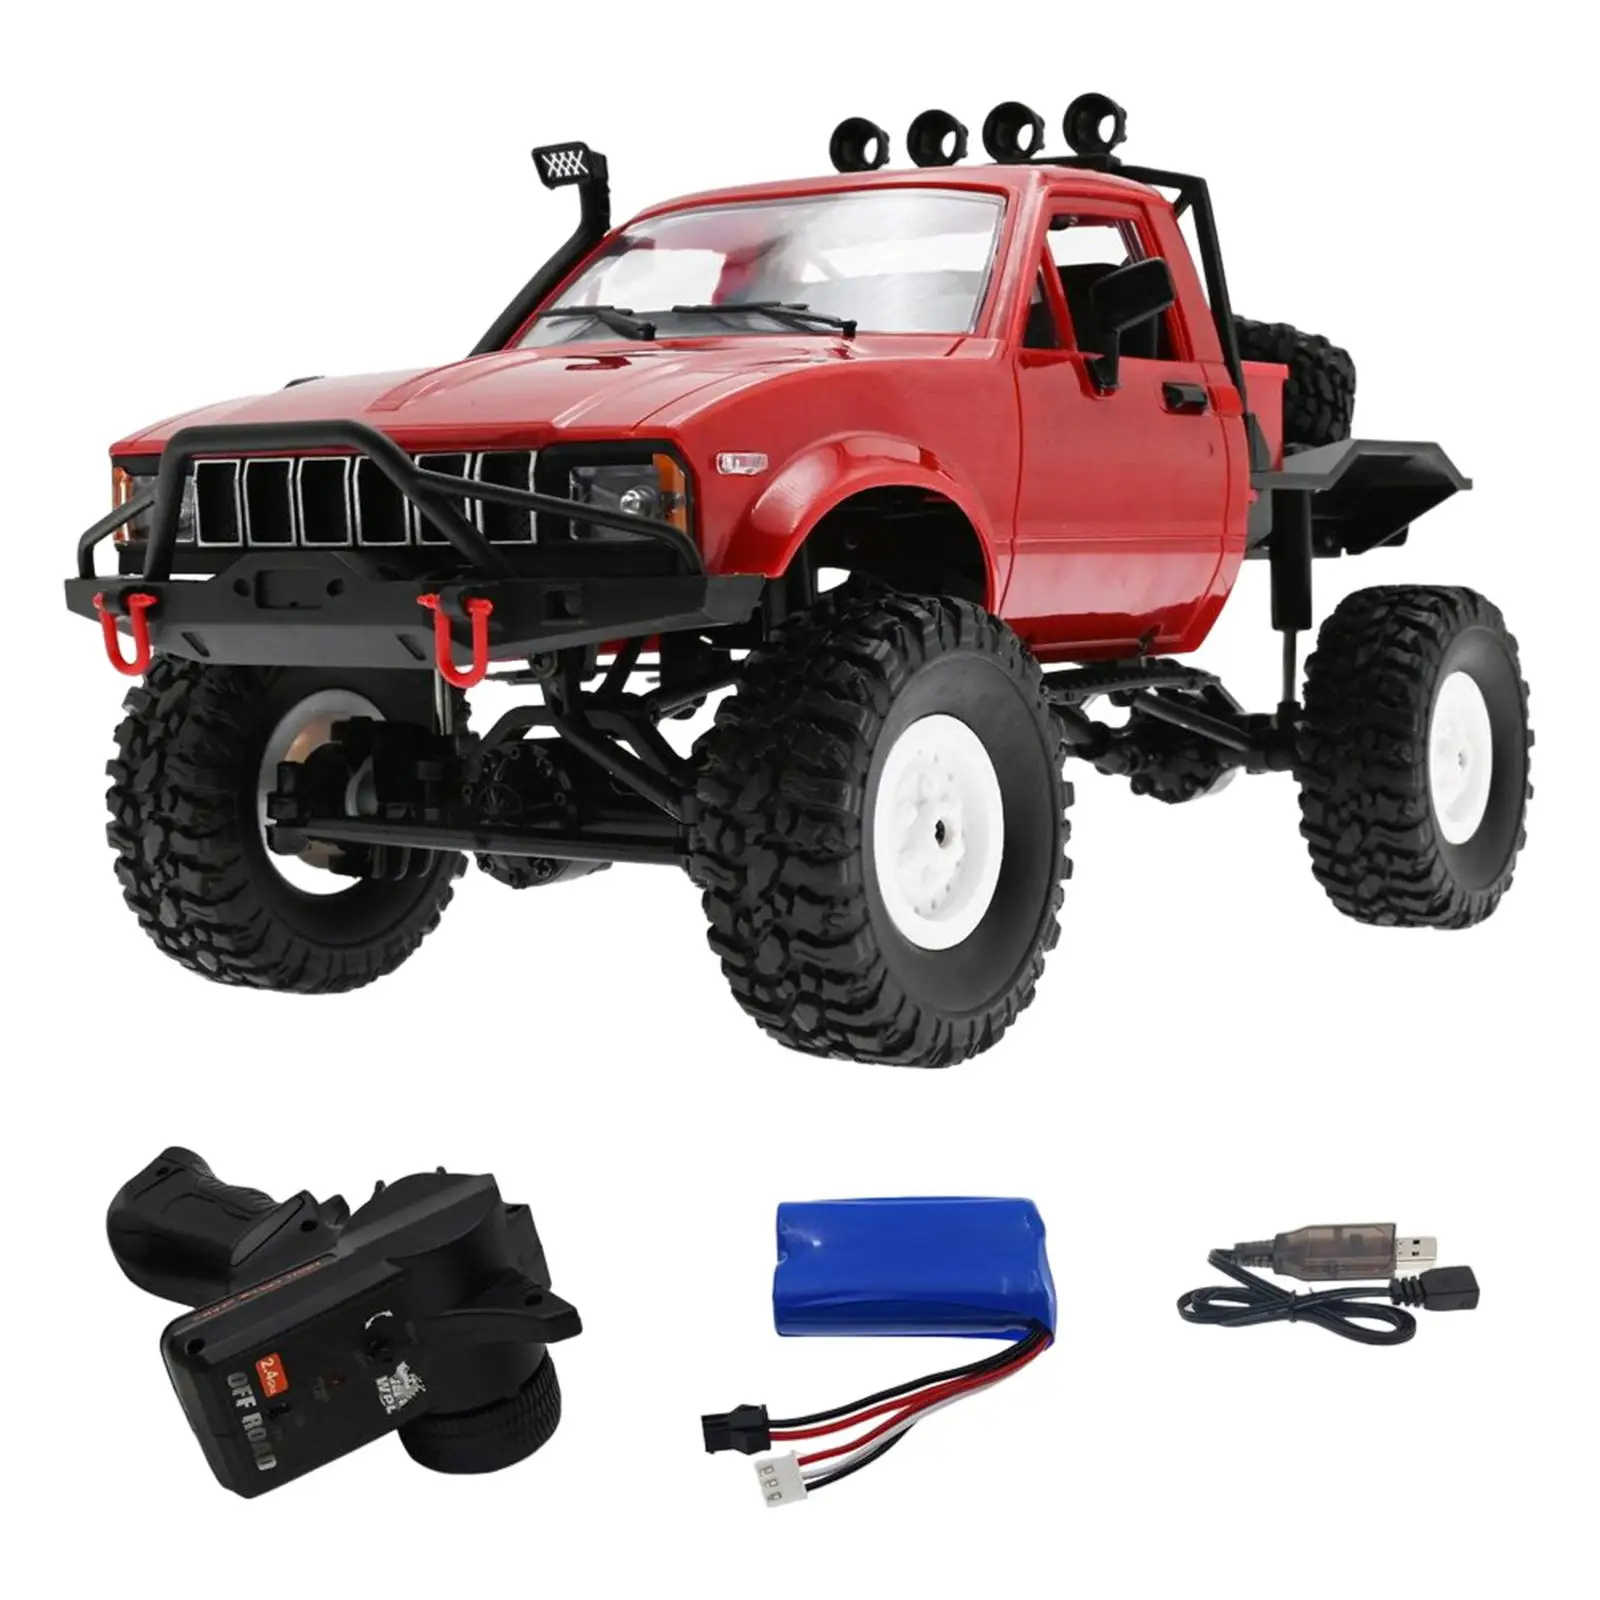 1/16 RC Truck C14 Rock Crawler 4CH 2.4GHz 4WD Remote Control Car for WPL Racing Vehicle All Terrain Car Kids Gift Model